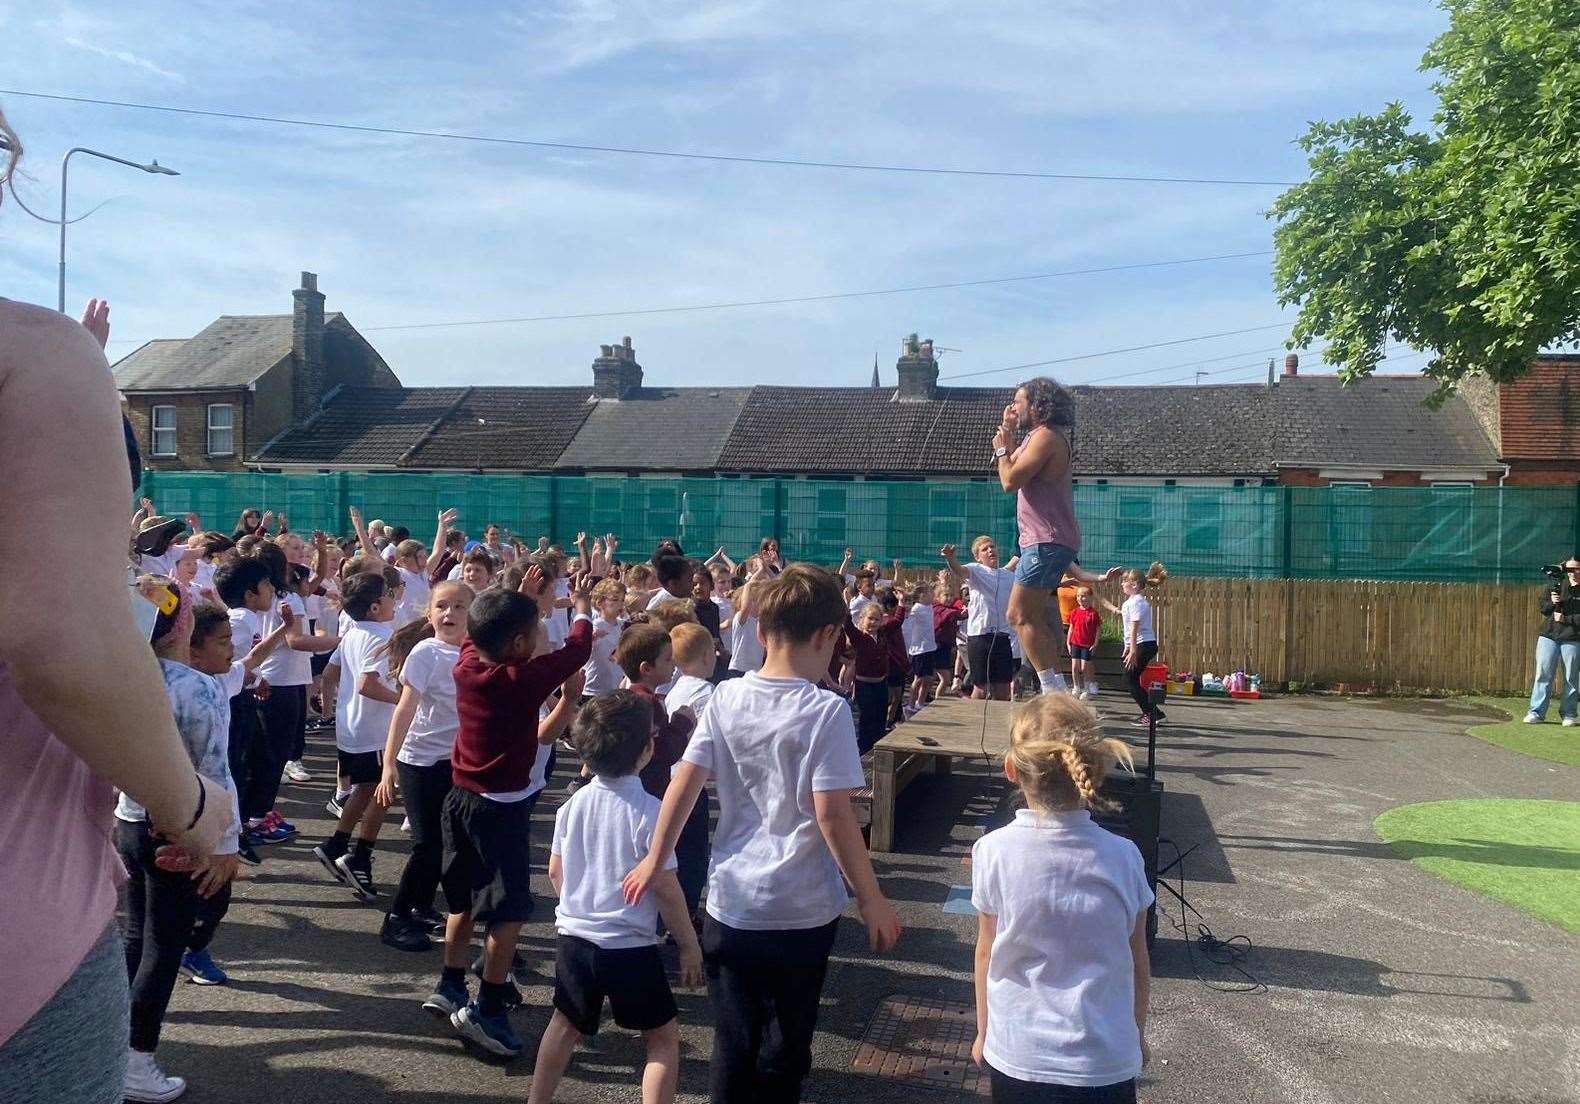 Joe Wicks did a whole school workout with pupils